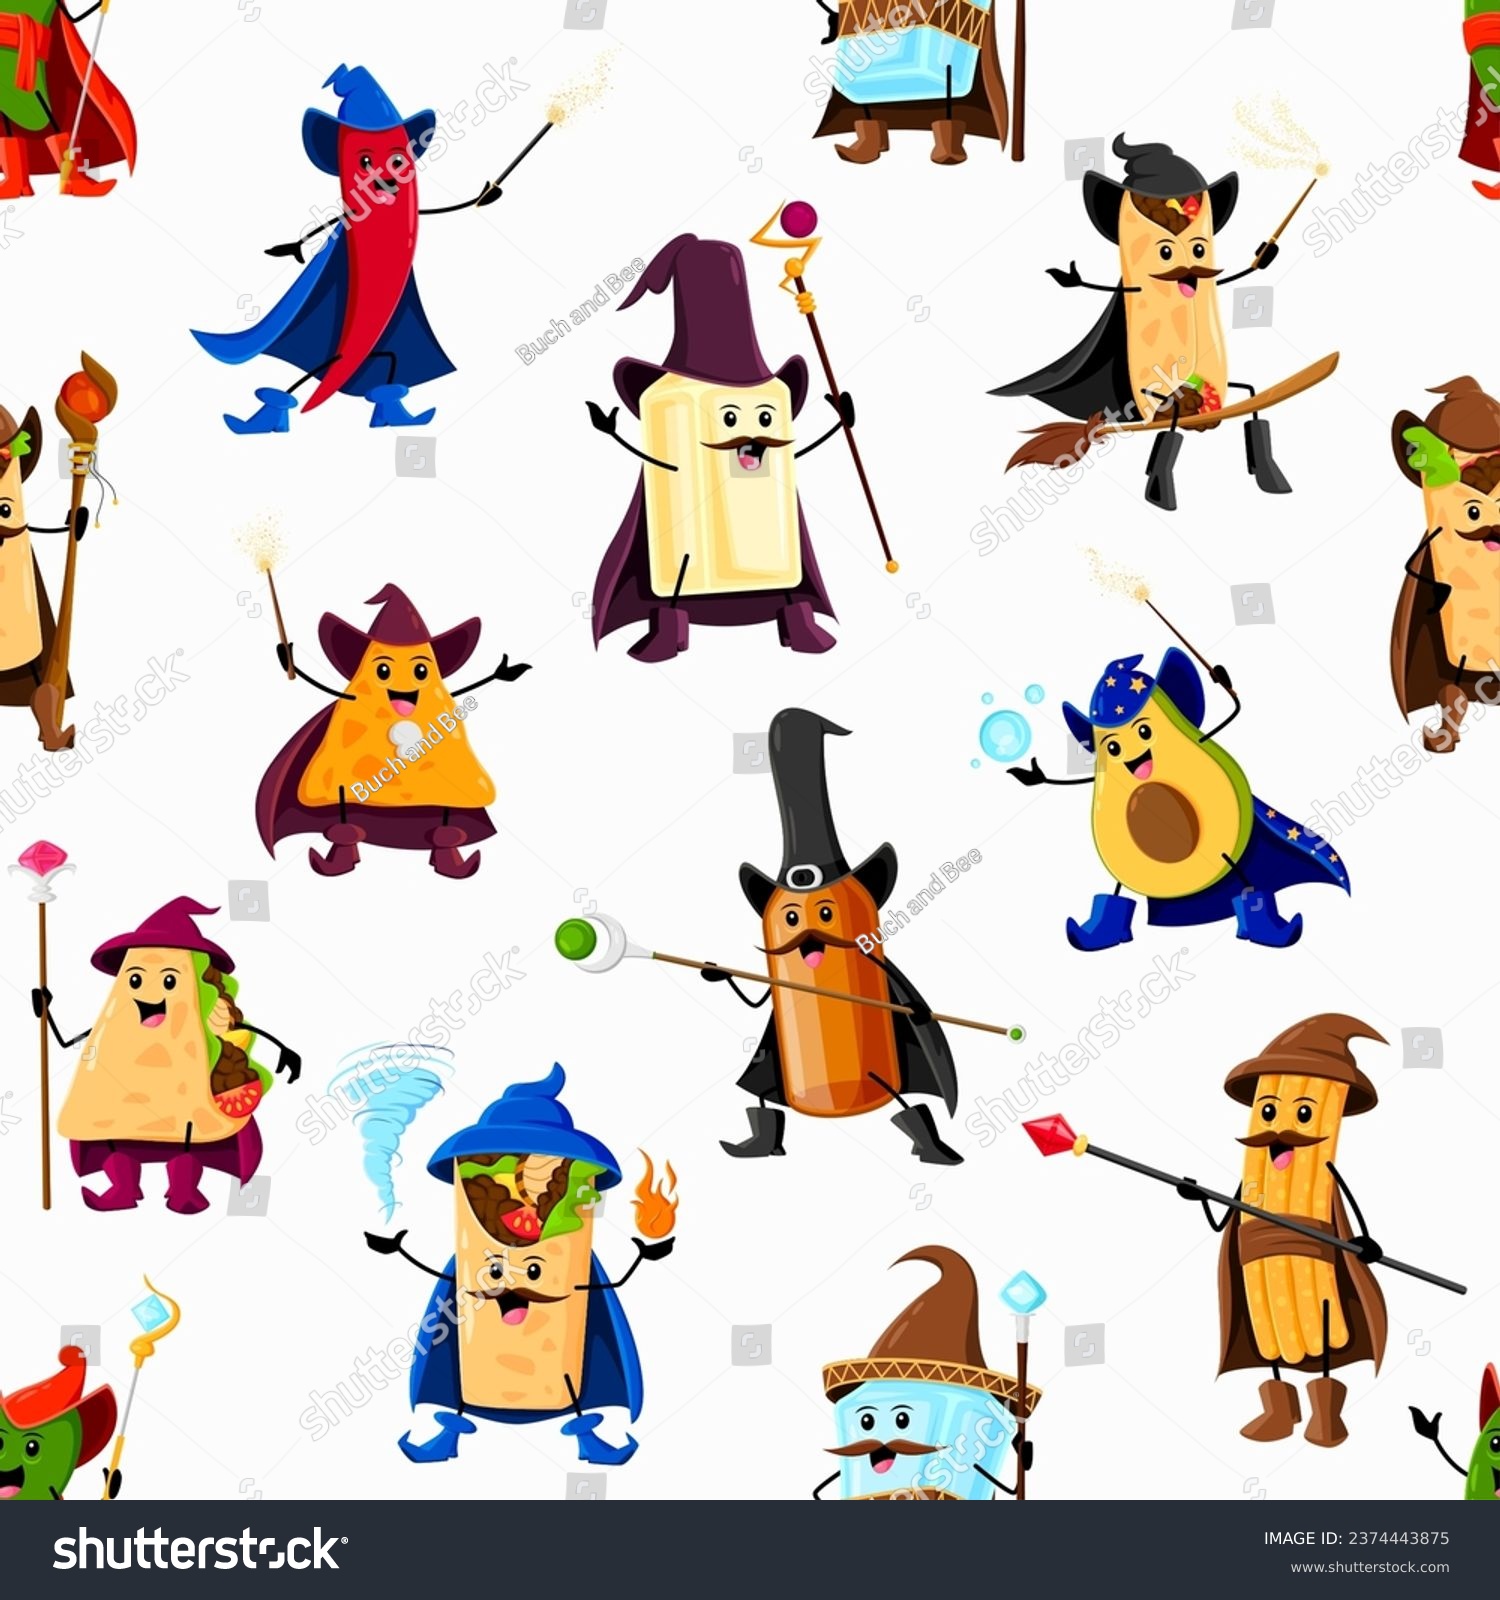 SVG of Cartoon Halloween tex mex food wizard characters pattern. Vector tile with red chili pepper, tequila, mezcal and pulque bottles. Burrito, quesadilla, churros or avocado with enchiladas or chimichanga svg